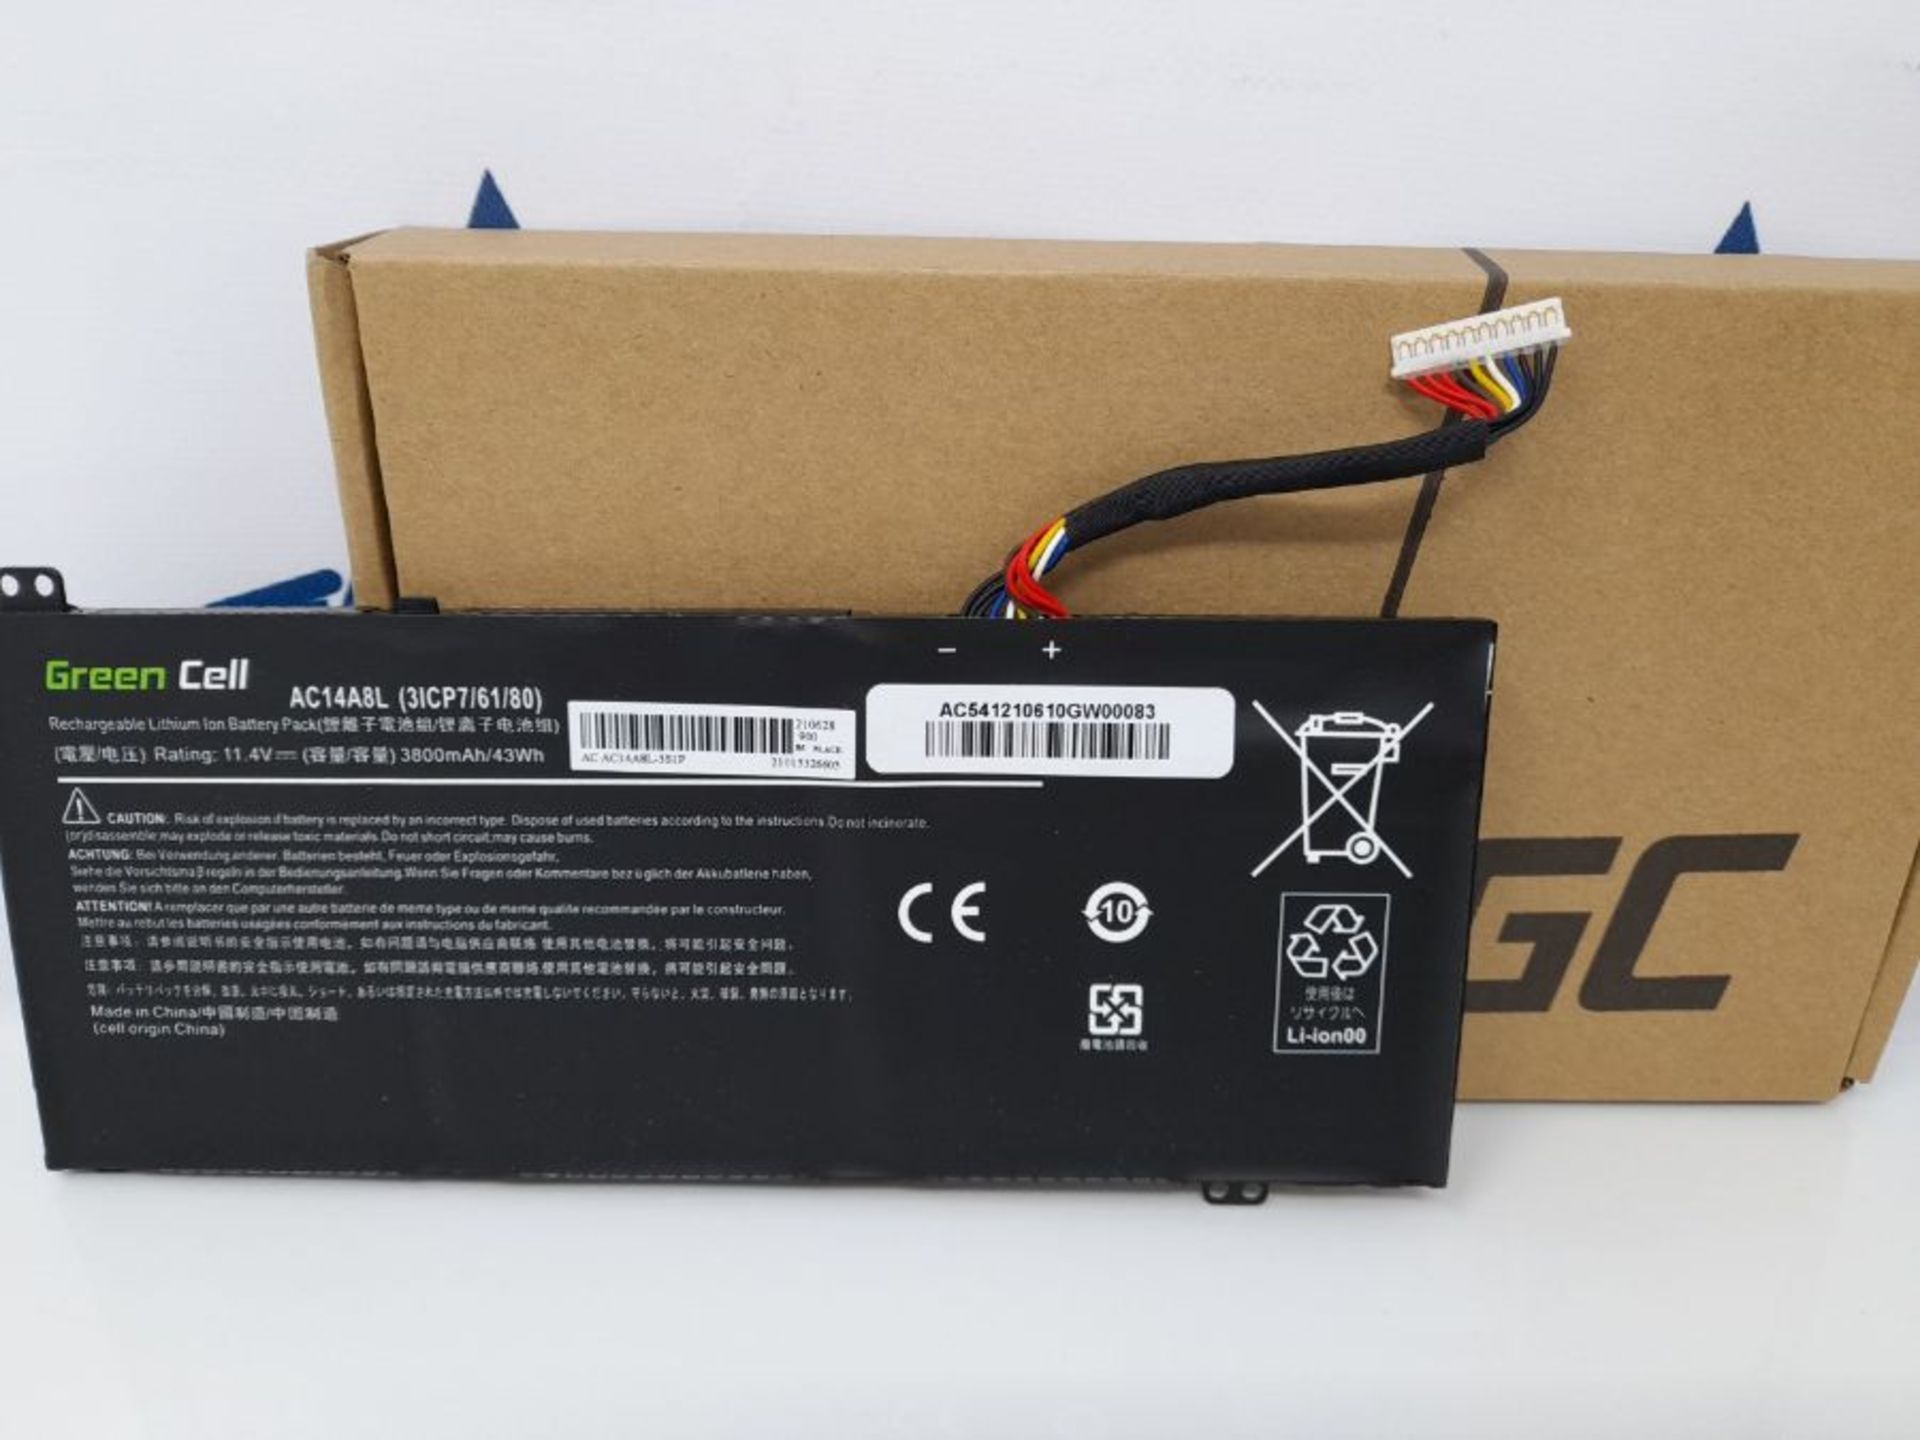 Green Cell AC14A8L AC15B7L Laptop Battery for Acer Aspire V15 Nitro VN7-571G VN7-572G - Image 2 of 3